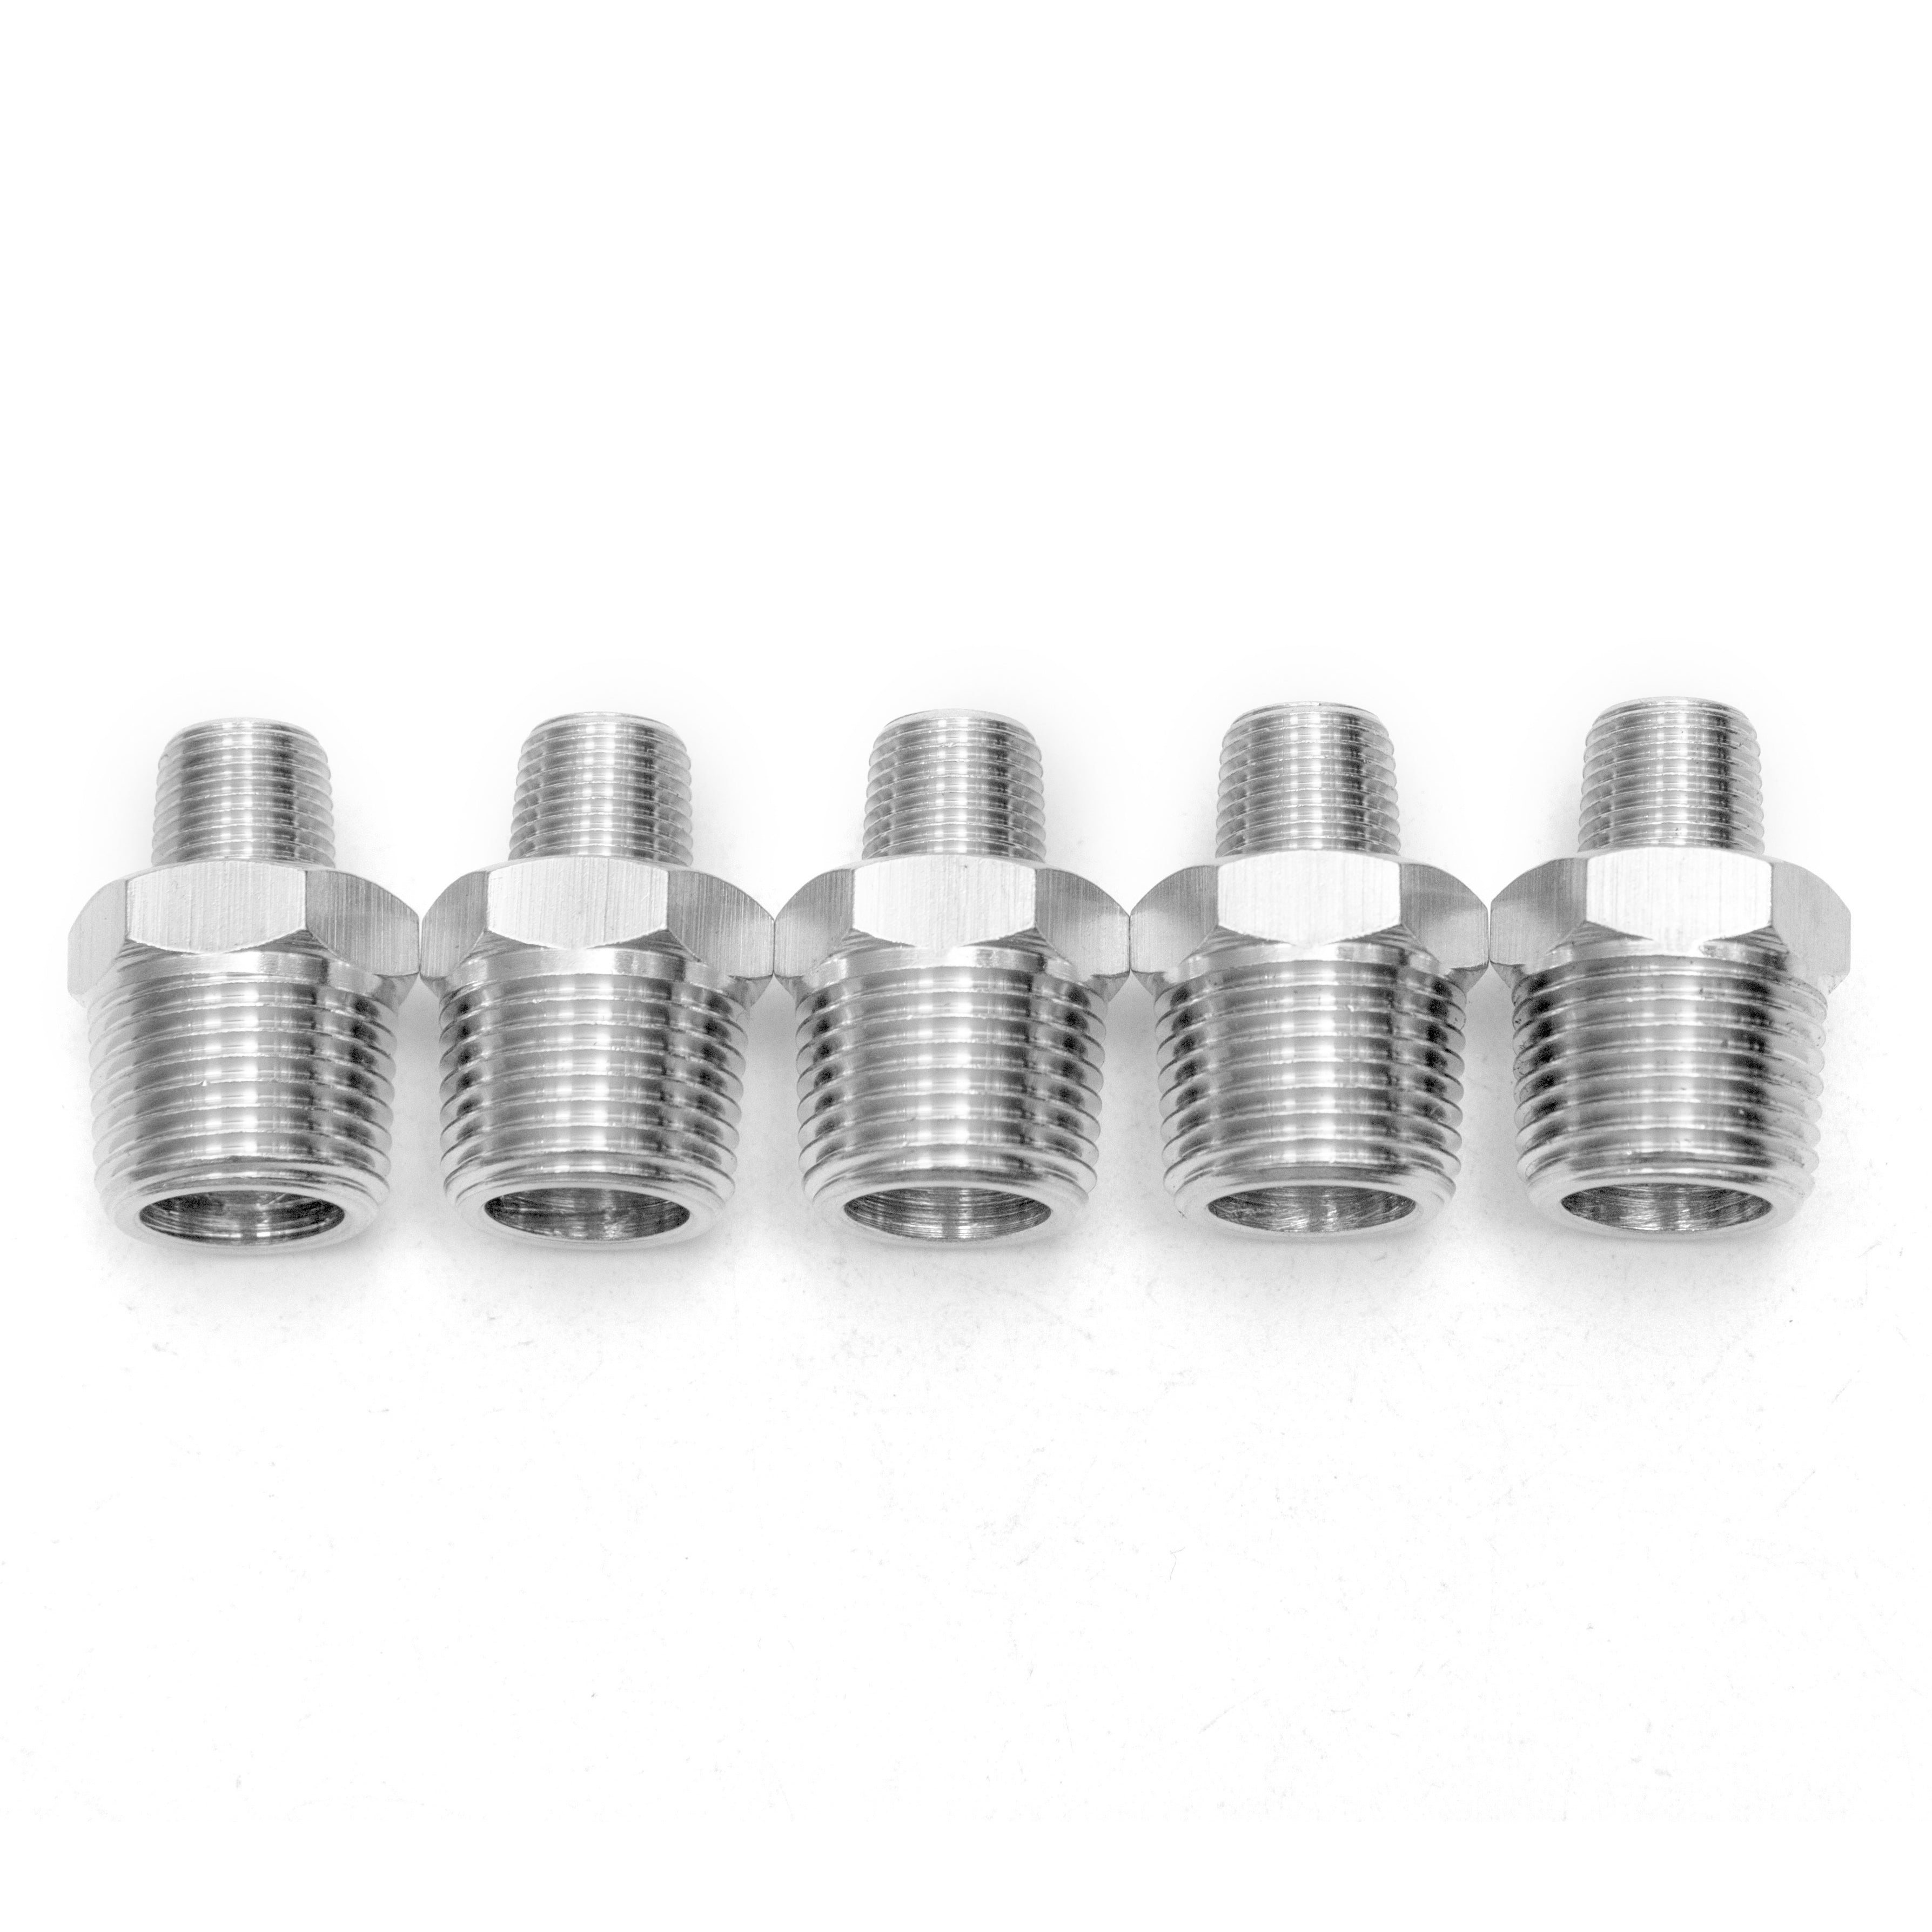 LTWFITTING Stainless Steel 316 Pipe Hex Reducing Nipple Fitting 3/8-Inch x 1/8-Inch Male BSPT (Pack of 5)